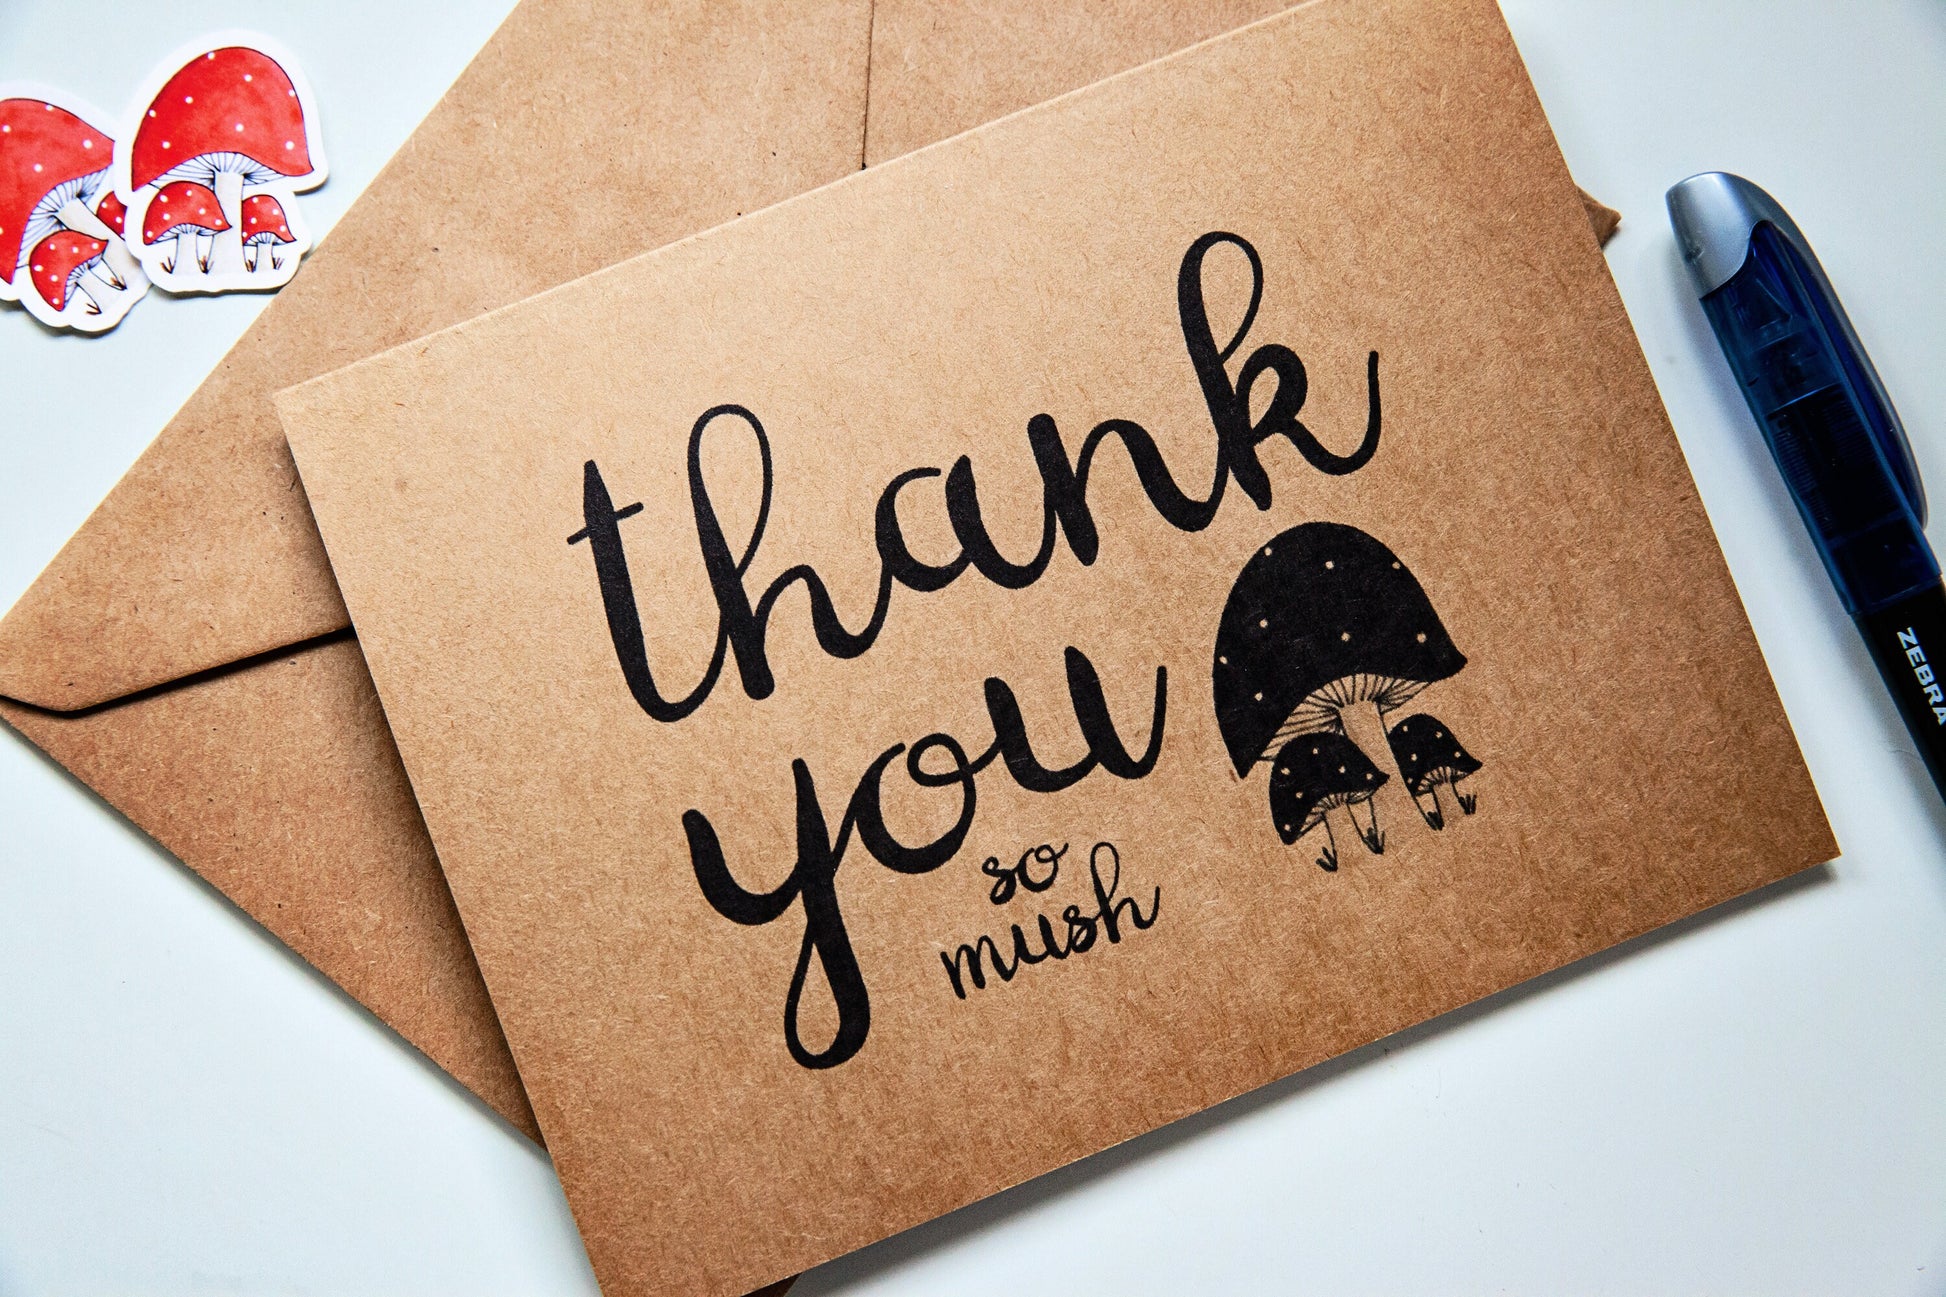 a kraft paper greeting card with matching envelope. The card says "thank you so mush" and has an illustration of a trio of mushrooms.